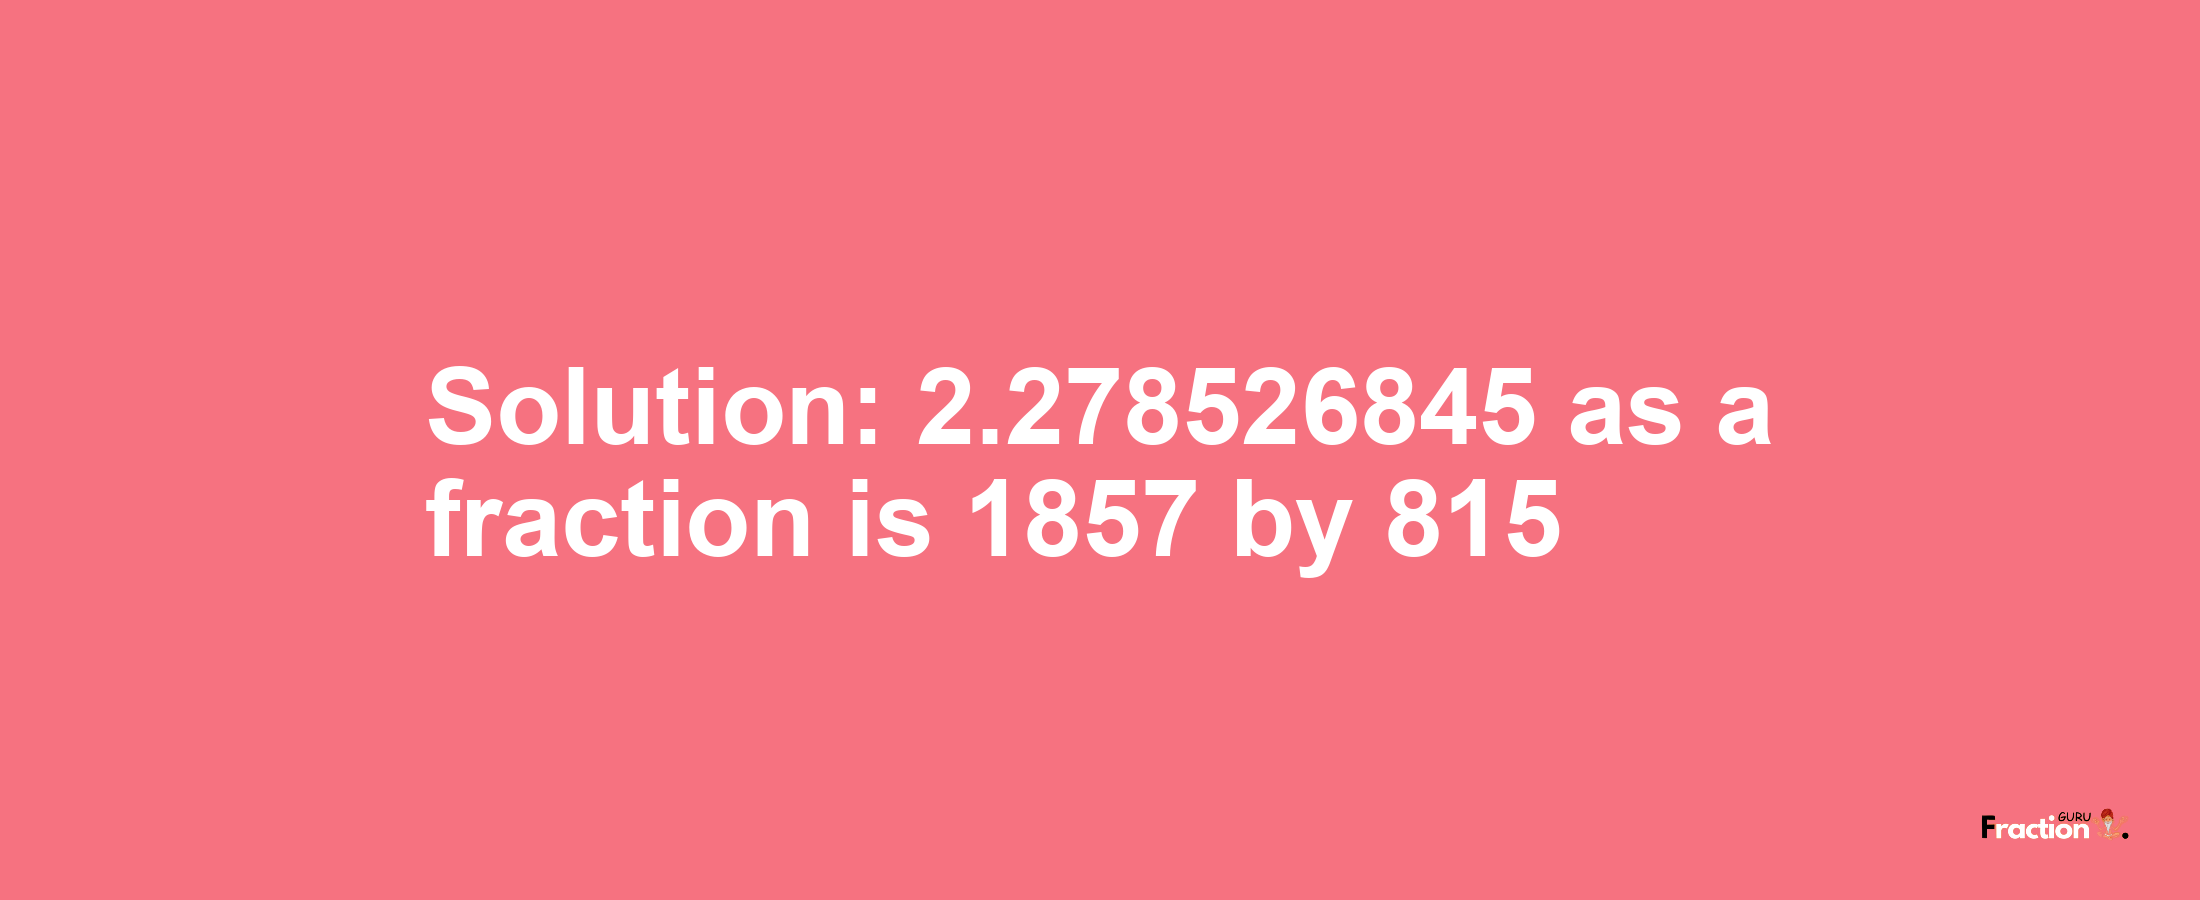 Solution:2.278526845 as a fraction is 1857/815